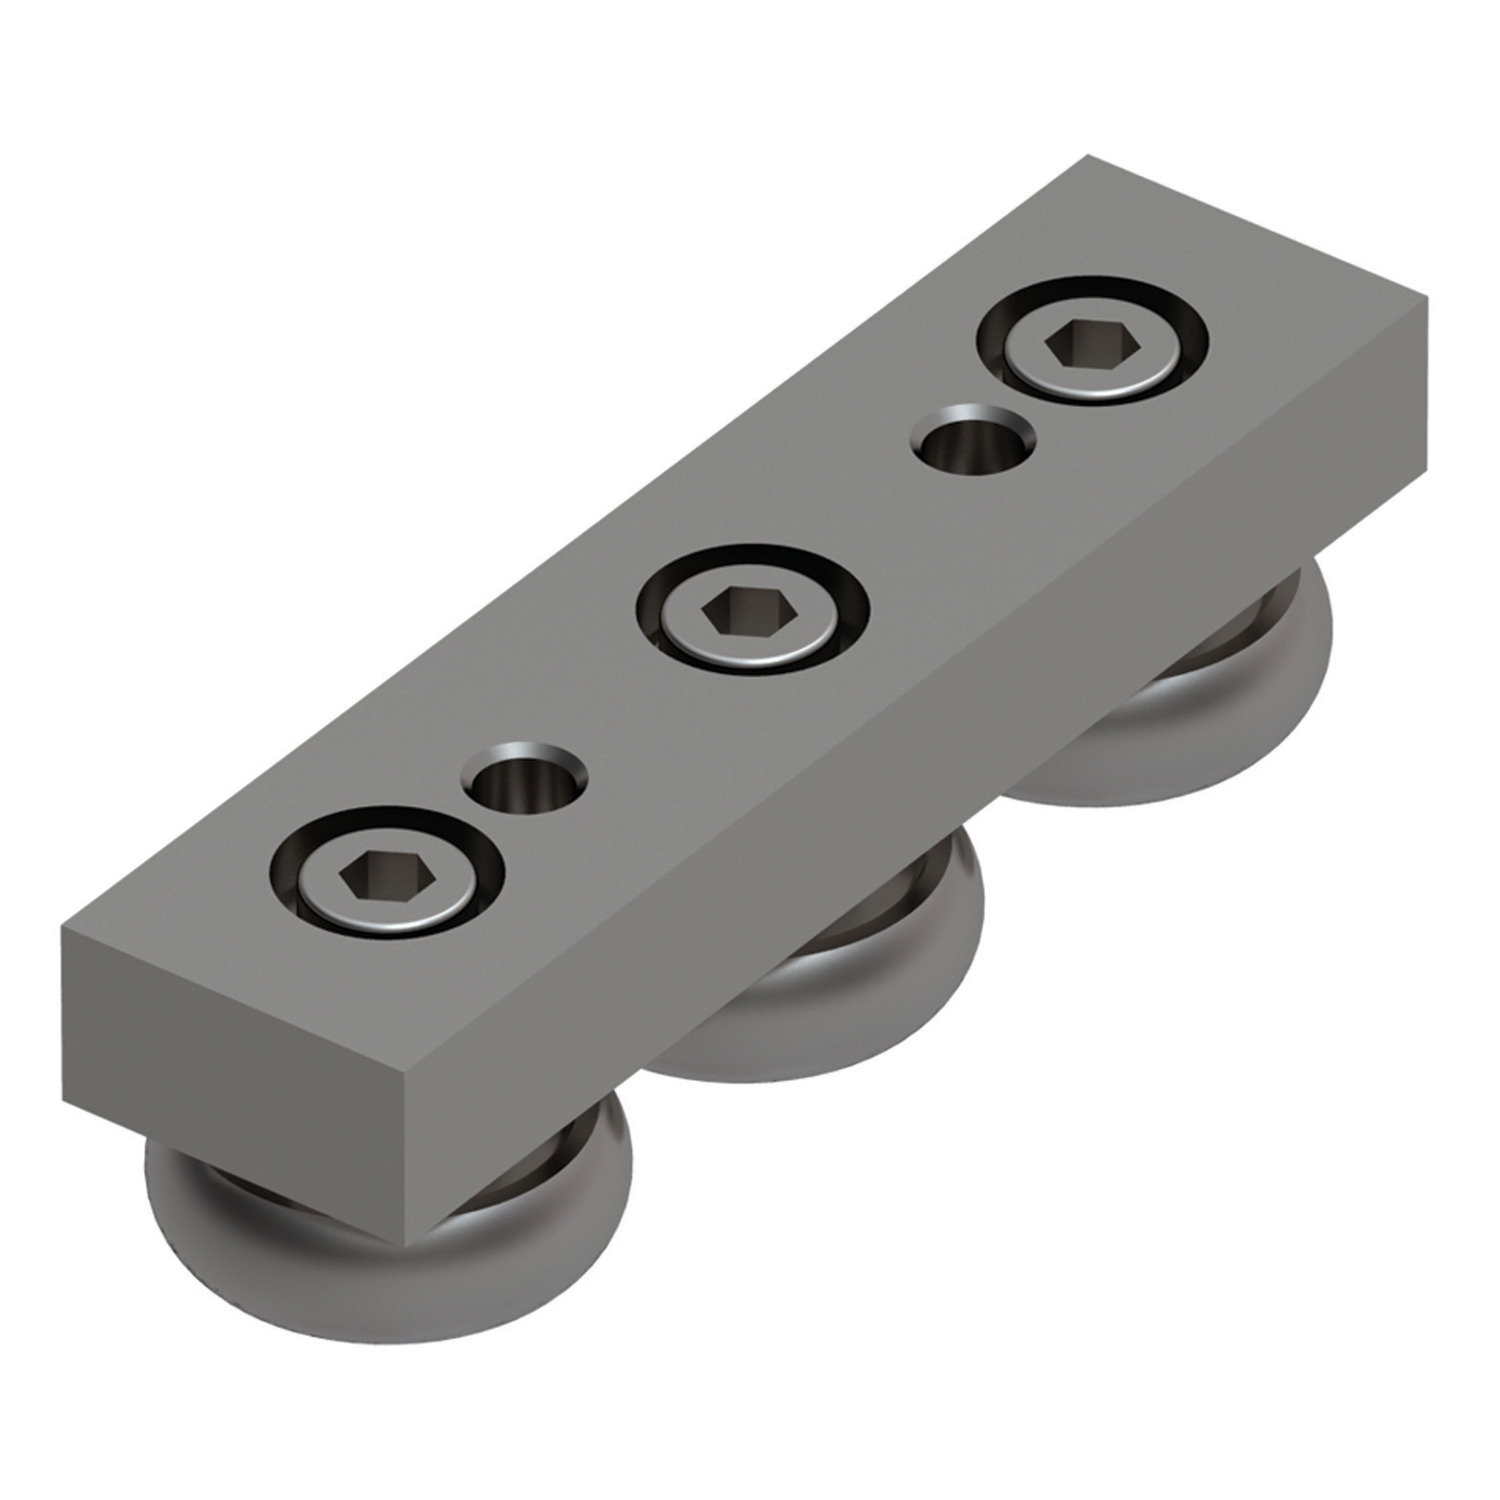 Product L1971.SB, Solid Body Stainless Sliders for T rail (master) / 